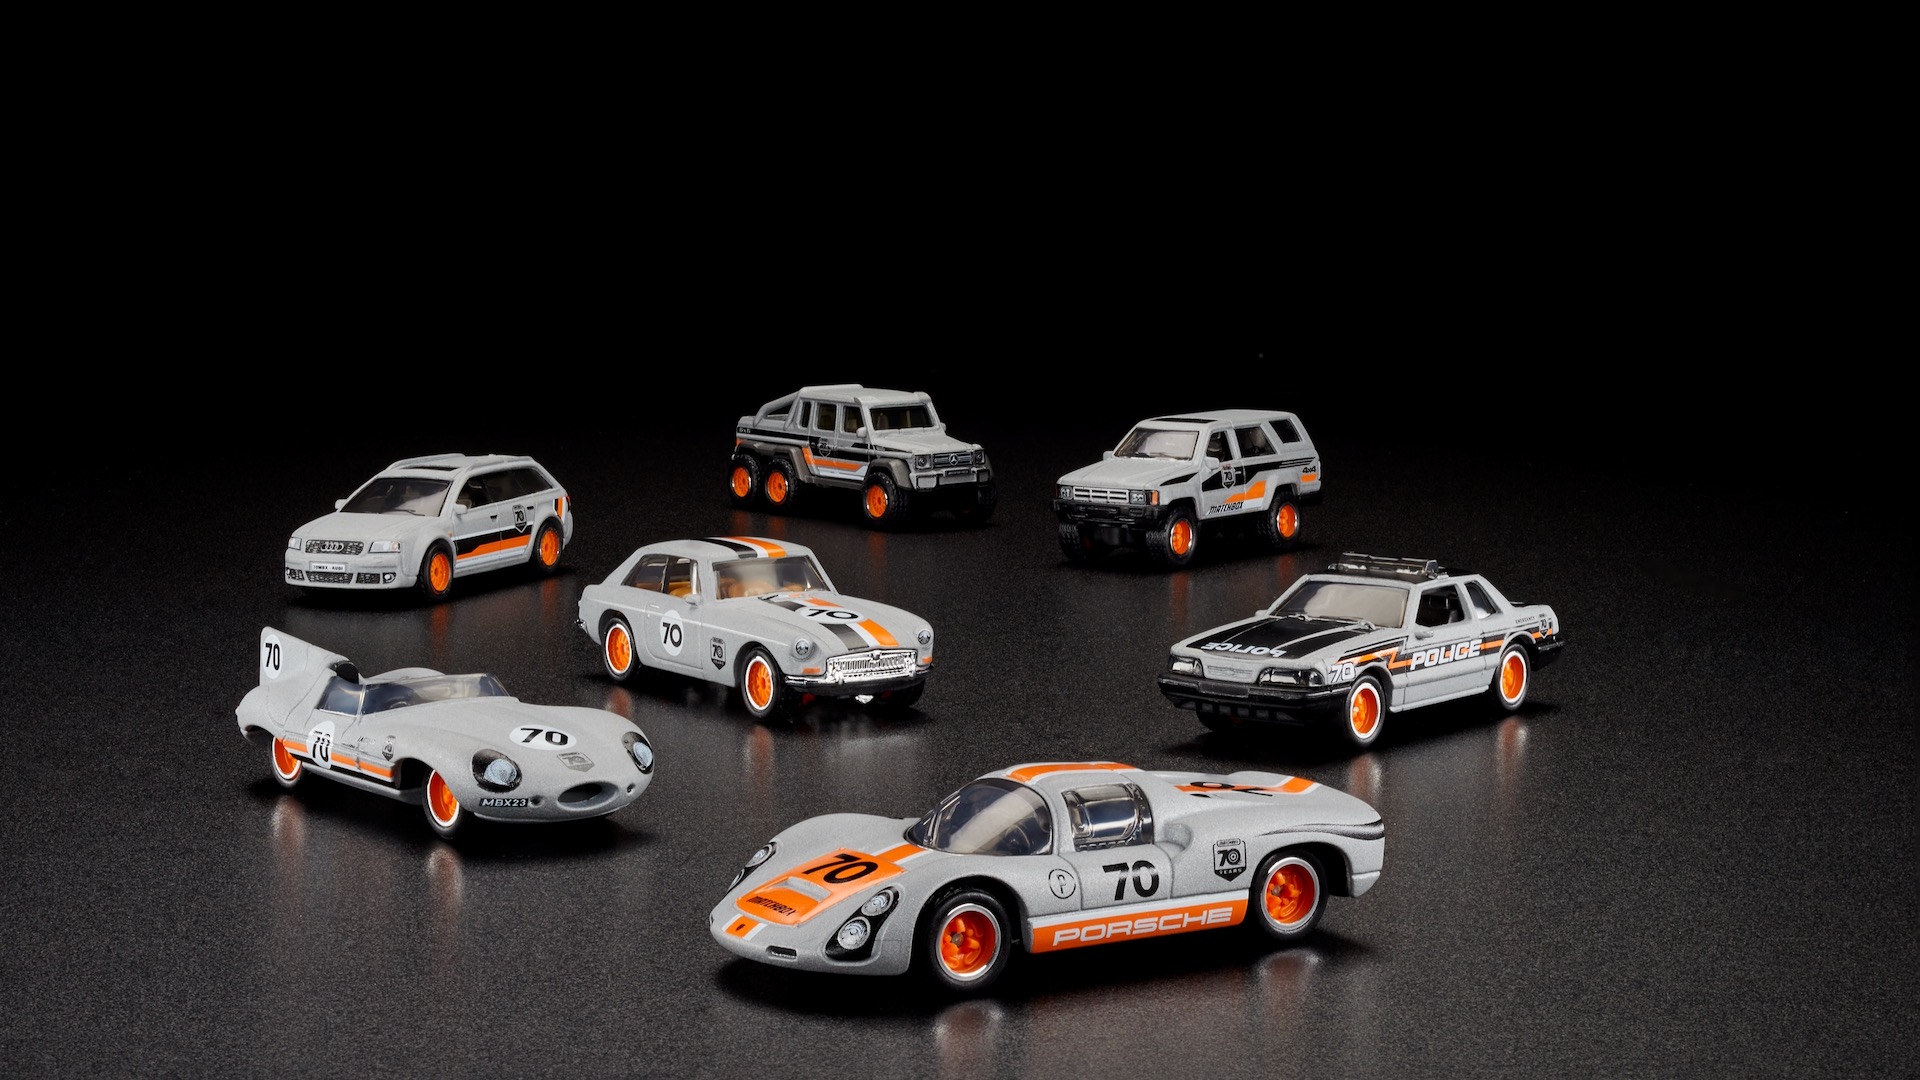 Matchbox releases 70th anniversary cars made with recycled zinc